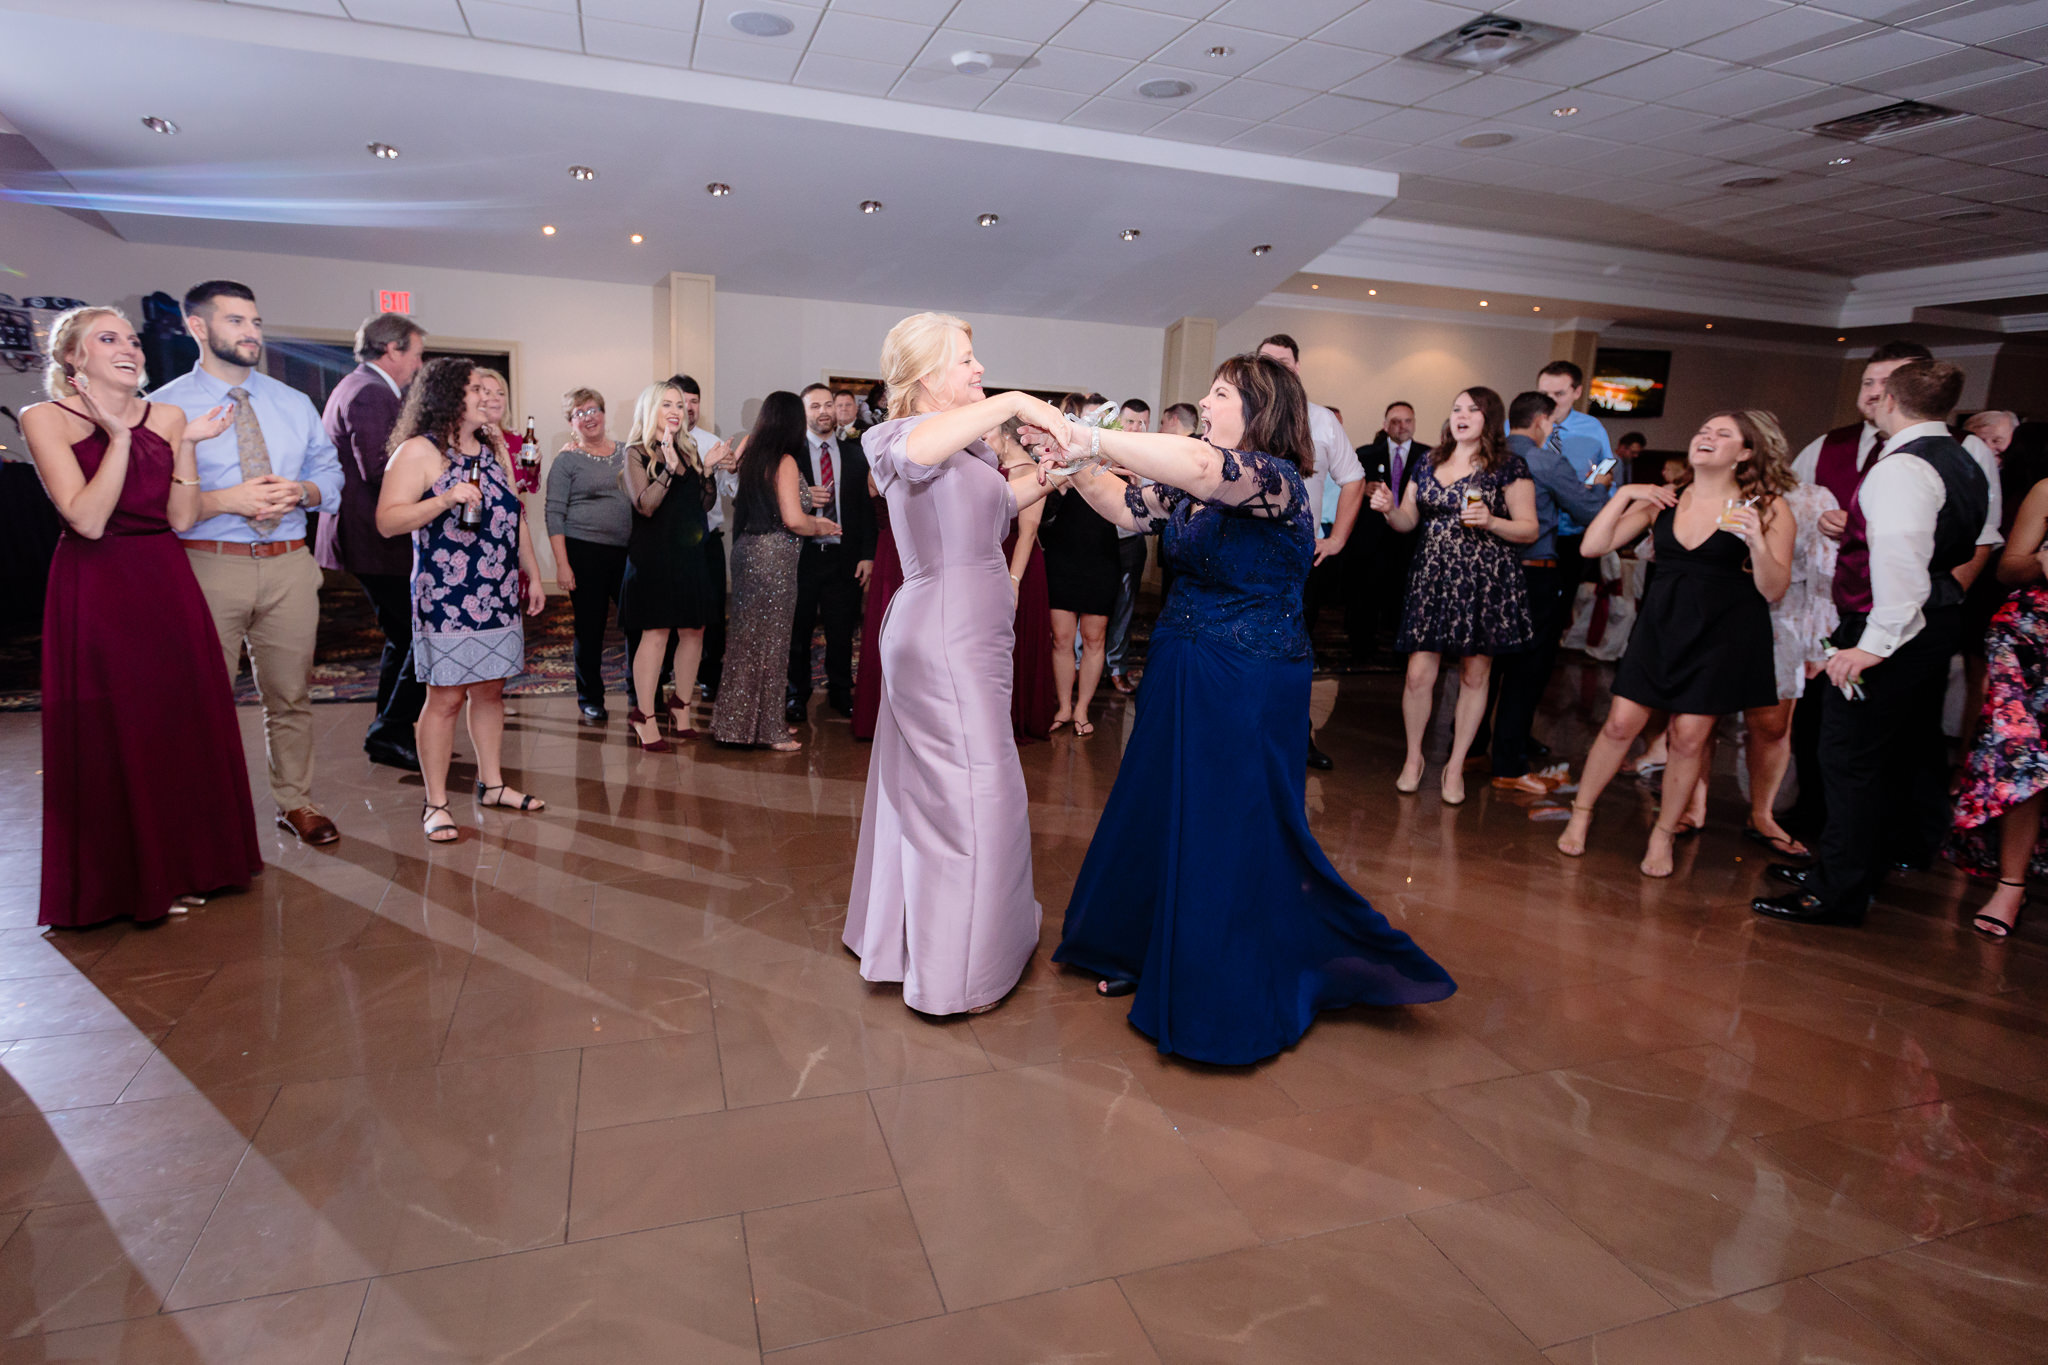 Mothers of the bride and groom dance together at a reception at the Fez